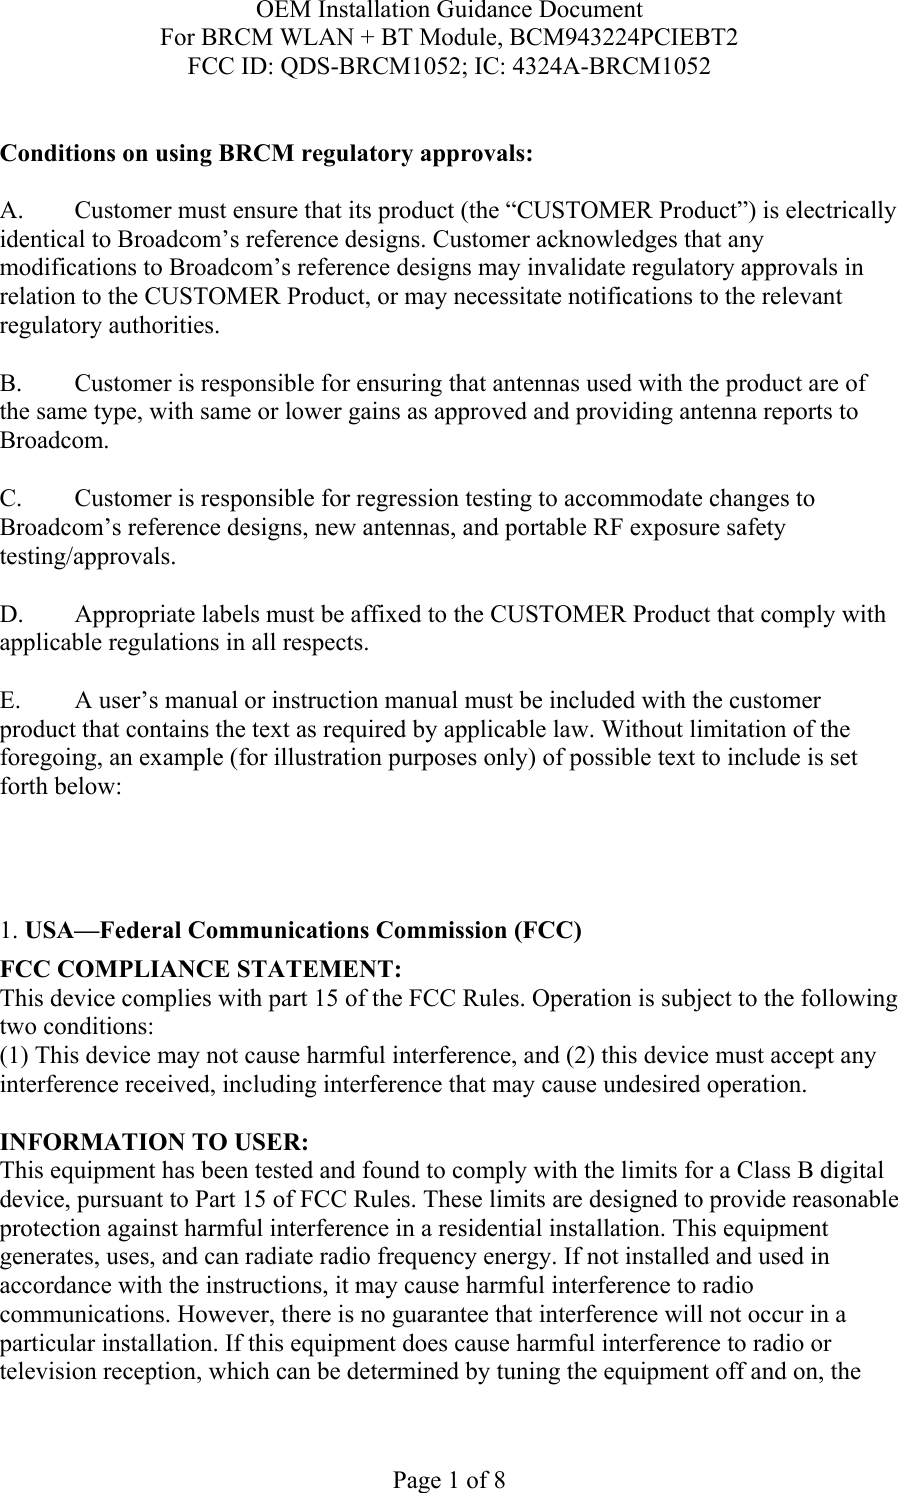 OEM Installation Guidance Document For BRCM WLAN + BT Module, BCM943224PCIEBT2 FCC ID: QDS-BRCM1052; IC: 4324A-BRCM1052  Page 1 of 8  Conditions on using BRCM regulatory approvals:   A.  Customer must ensure that its product (the “CUSTOMER Product”) is electrically identical to Broadcom’s reference designs. Customer acknowledges that any modifications to Broadcom’s reference designs may invalidate regulatory approvals in relation to the CUSTOMER Product, or may necessitate notifications to the relevant regulatory authorities.  B.   Customer is responsible for ensuring that antennas used with the product are of the same type, with same or lower gains as approved and providing antenna reports to Broadcom.  C.   Customer is responsible for regression testing to accommodate changes to Broadcom’s reference designs, new antennas, and portable RF exposure safety testing/approvals.  D.  Appropriate labels must be affixed to the CUSTOMER Product that comply with applicable regulations in all respects.    E.  A user’s manual or instruction manual must be included with the customer product that contains the text as required by applicable law. Without limitation of the foregoing, an example (for illustration purposes only) of possible text to include is set forth below:      1. USA—Federal Communications Commission (FCC) FCC COMPLIANCE STATEMENT: This device complies with part 15 of the FCC Rules. Operation is subject to the following two conditions: (1) This device may not cause harmful interference, and (2) this device must accept any interference received, including interference that may cause undesired operation.  INFORMATION TO USER: This equipment has been tested and found to comply with the limits for a Class B digital device, pursuant to Part 15 of FCC Rules. These limits are designed to provide reasonable protection against harmful interference in a residential installation. This equipment generates, uses, and can radiate radio frequency energy. If not installed and used in accordance with the instructions, it may cause harmful interference to radio communications. However, there is no guarantee that interference will not occur in a particular installation. If this equipment does cause harmful interference to radio or television reception, which can be determined by tuning the equipment off and on, the 